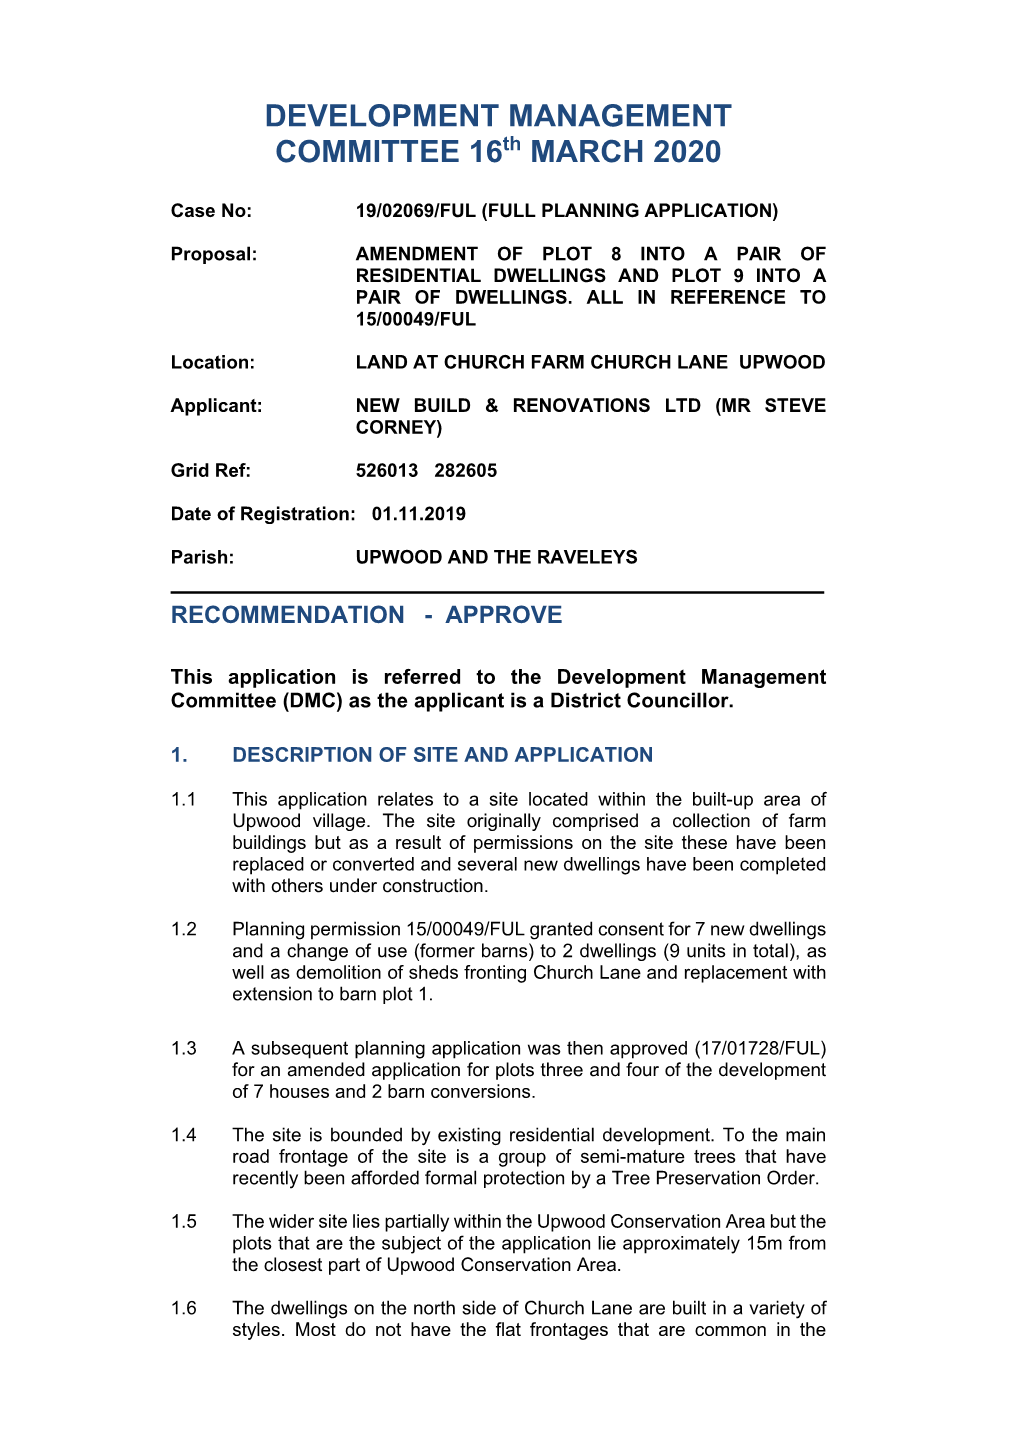 DEVELOPMENT MANAGEMENT COMMITTEE 16Th MARCH 2020